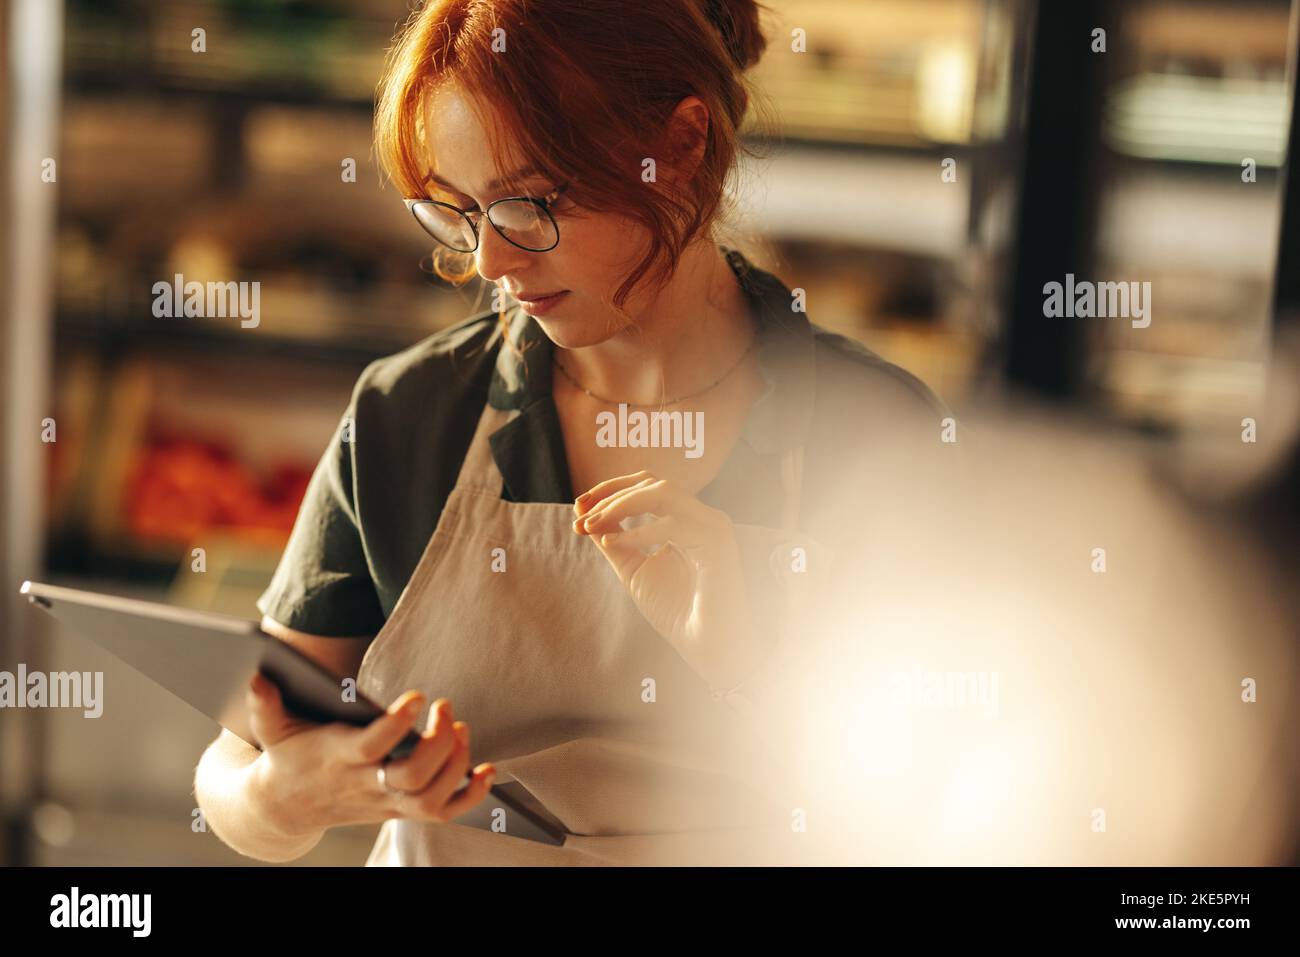 Shop owner taking inventory using a digital tablet in her grocery store. Young female entrepreneur running her small business using wireless technolog Stock Photo